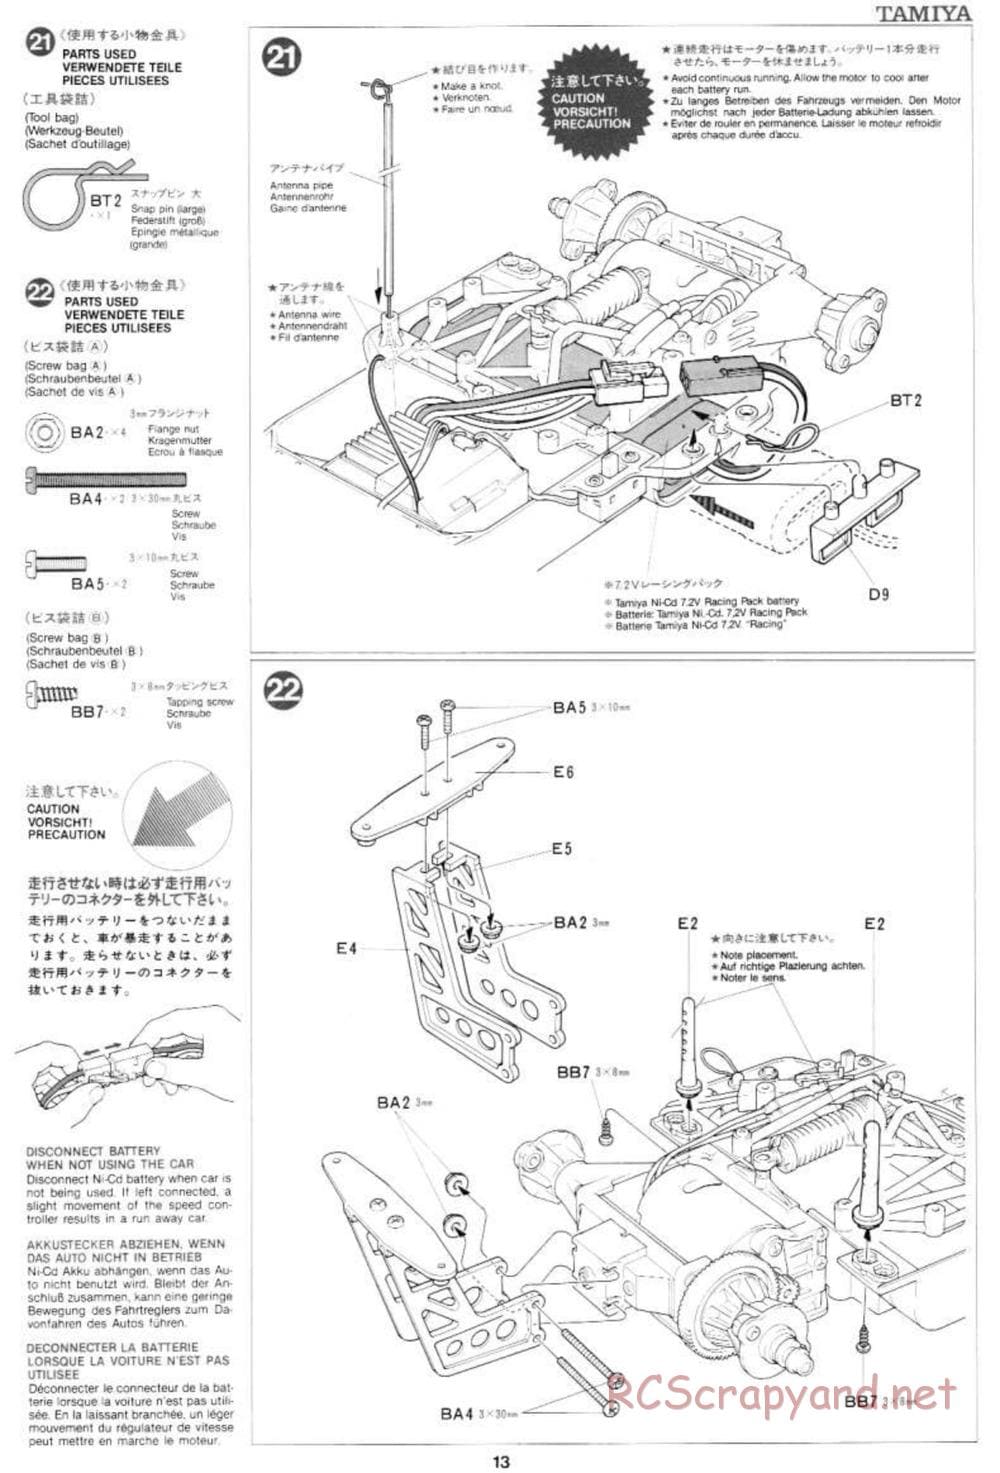 Tamiya - Mercedes-Benz C11 - Group-C Chassis - Manual - Page 13